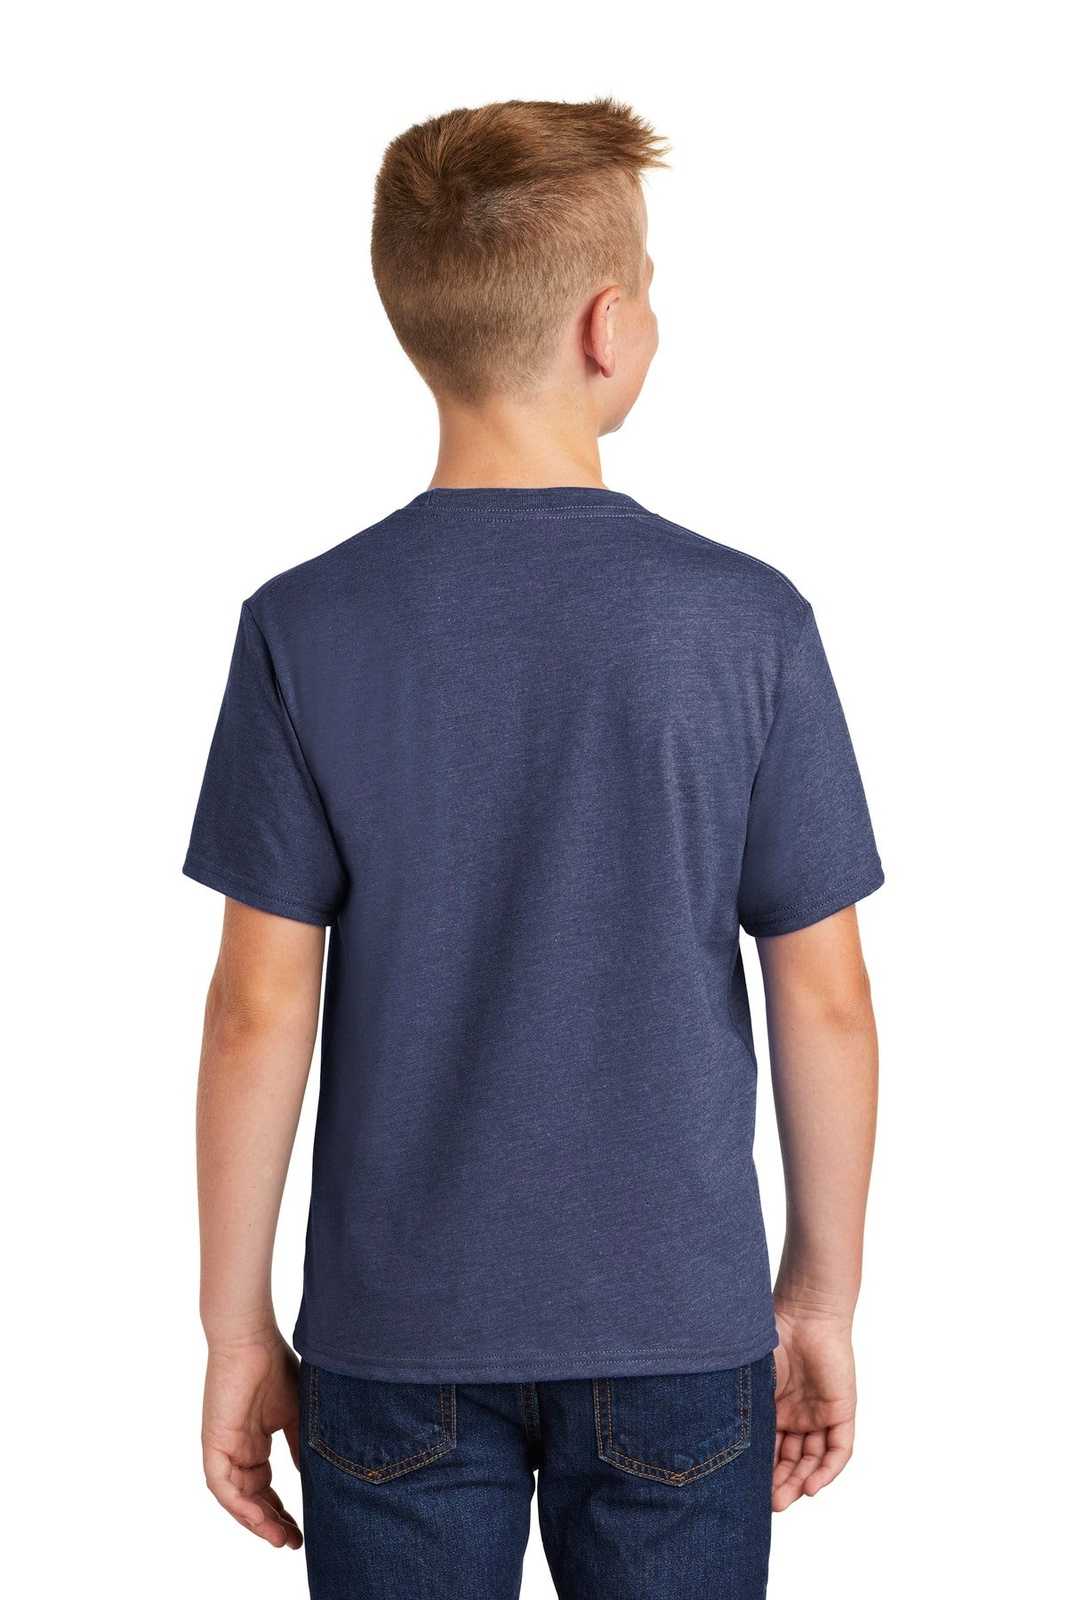 Port & Company PC455Y Youth Fan Favorite Blend Tee - Team Navy Heather - HIT a Double - 1